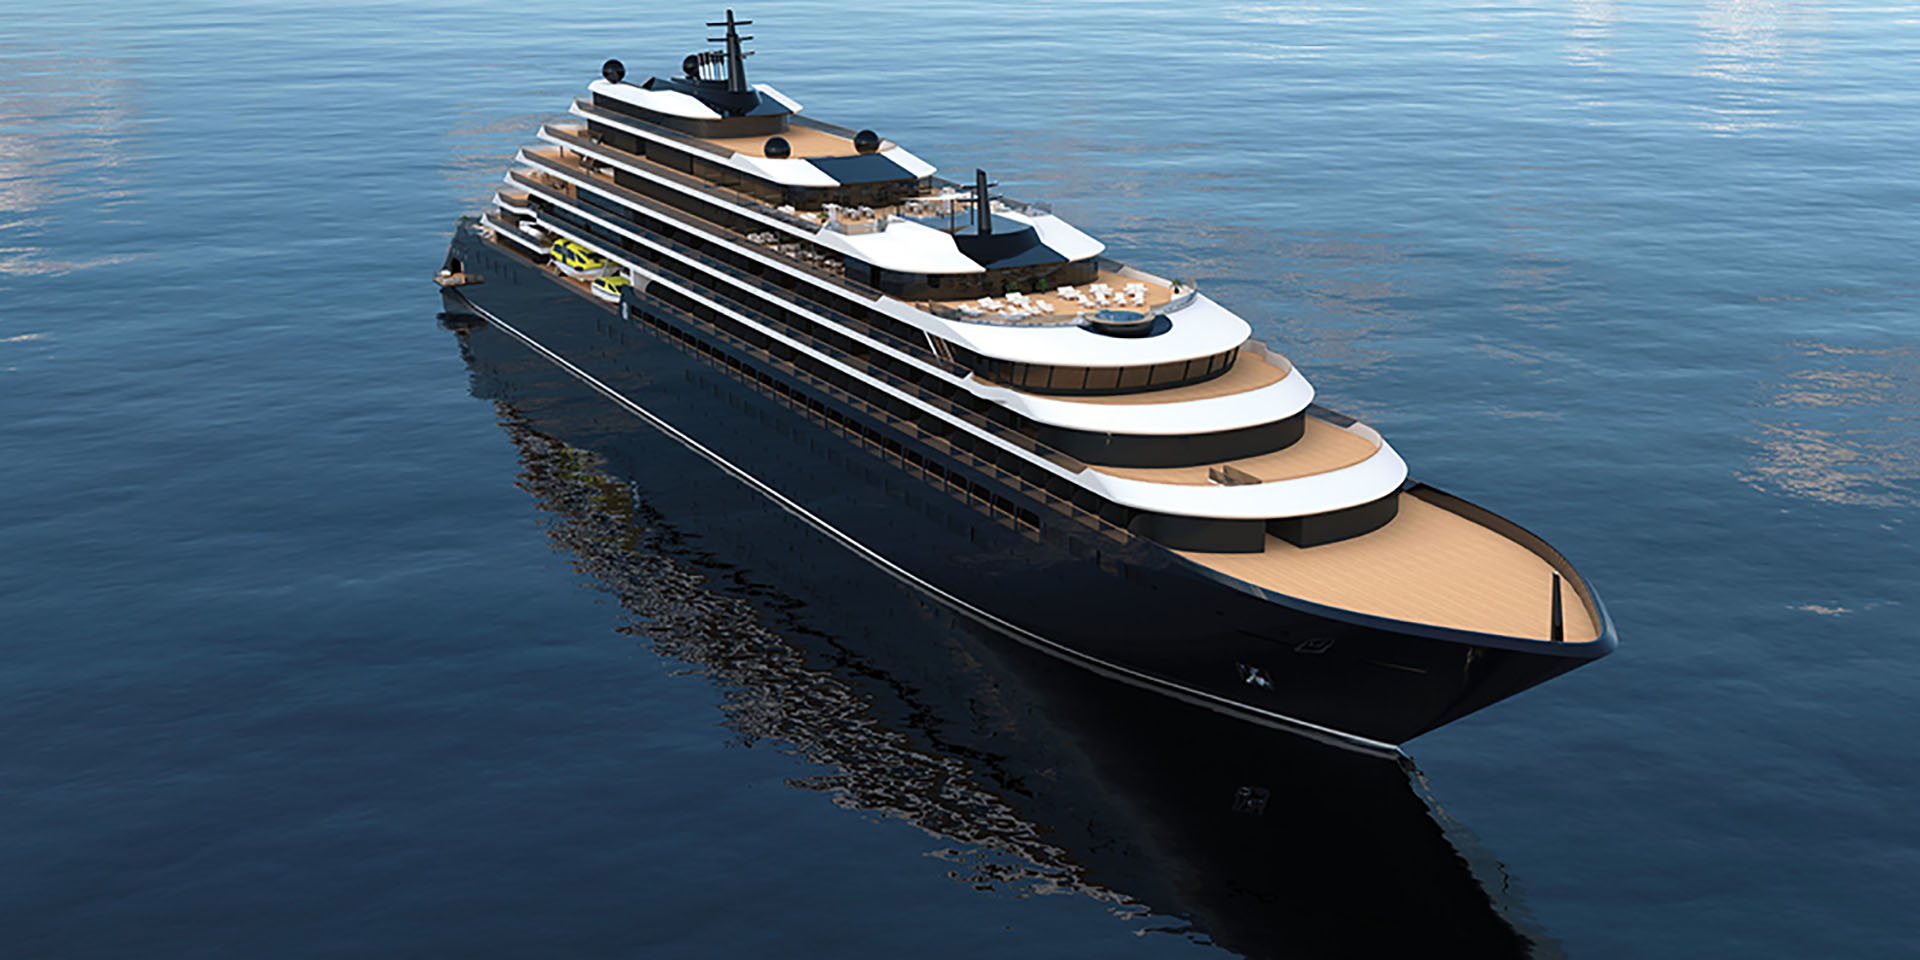 Small cruise fans can now book their berth on the hotly-anticipated first vessel of the Ritz Carlton Yacht Collection.